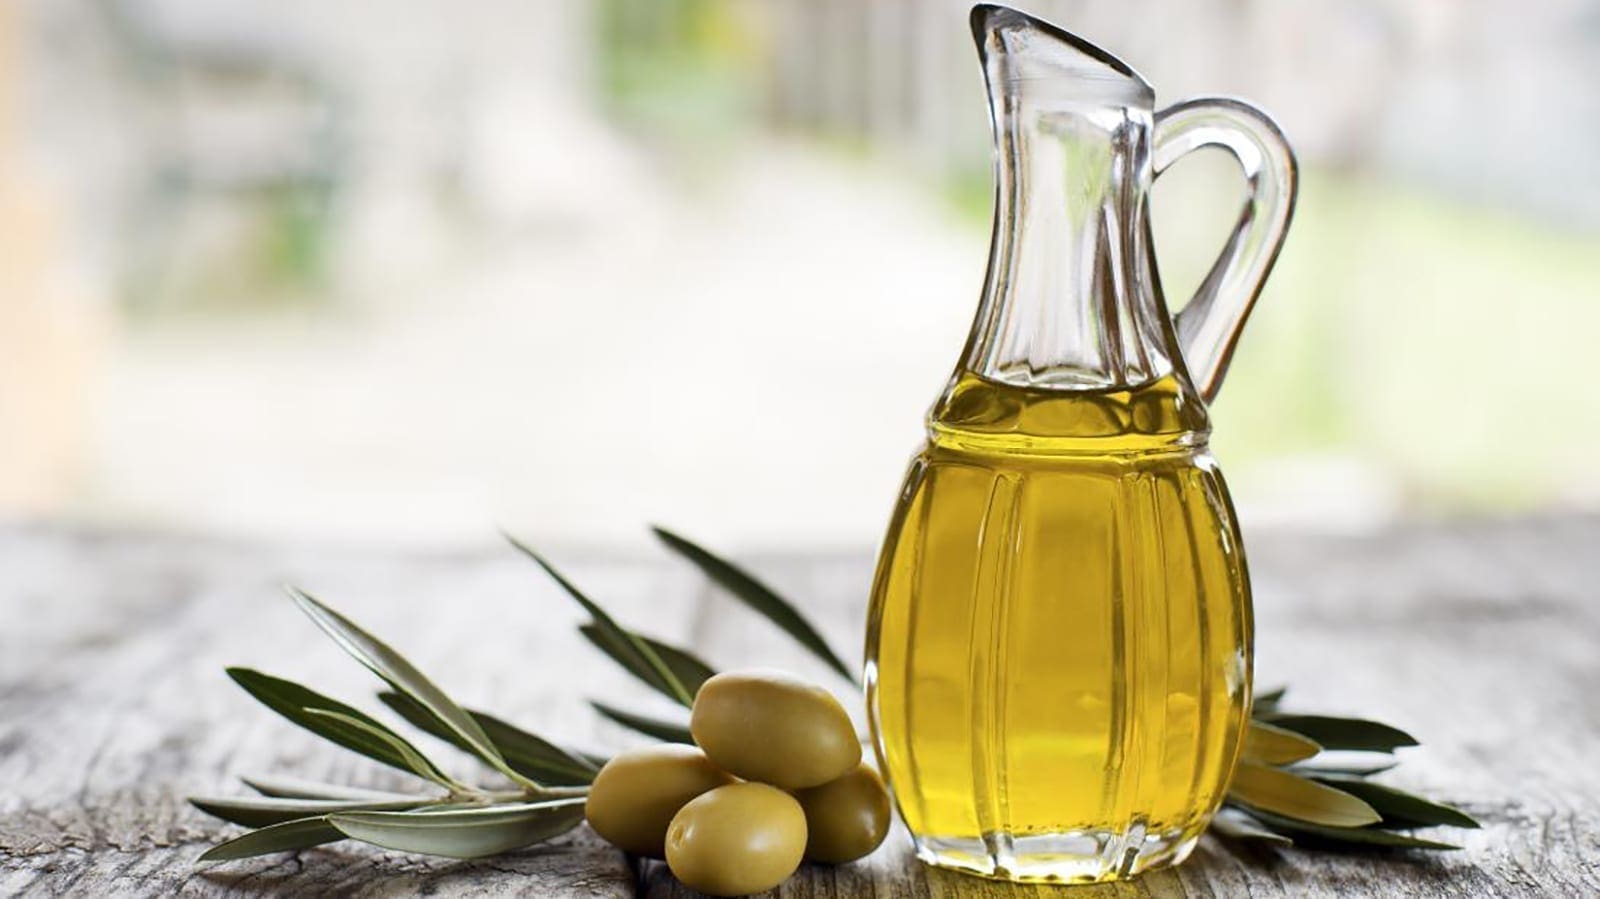 Olive oil use found to lower risk of cardiovascular disease and cancer mortality